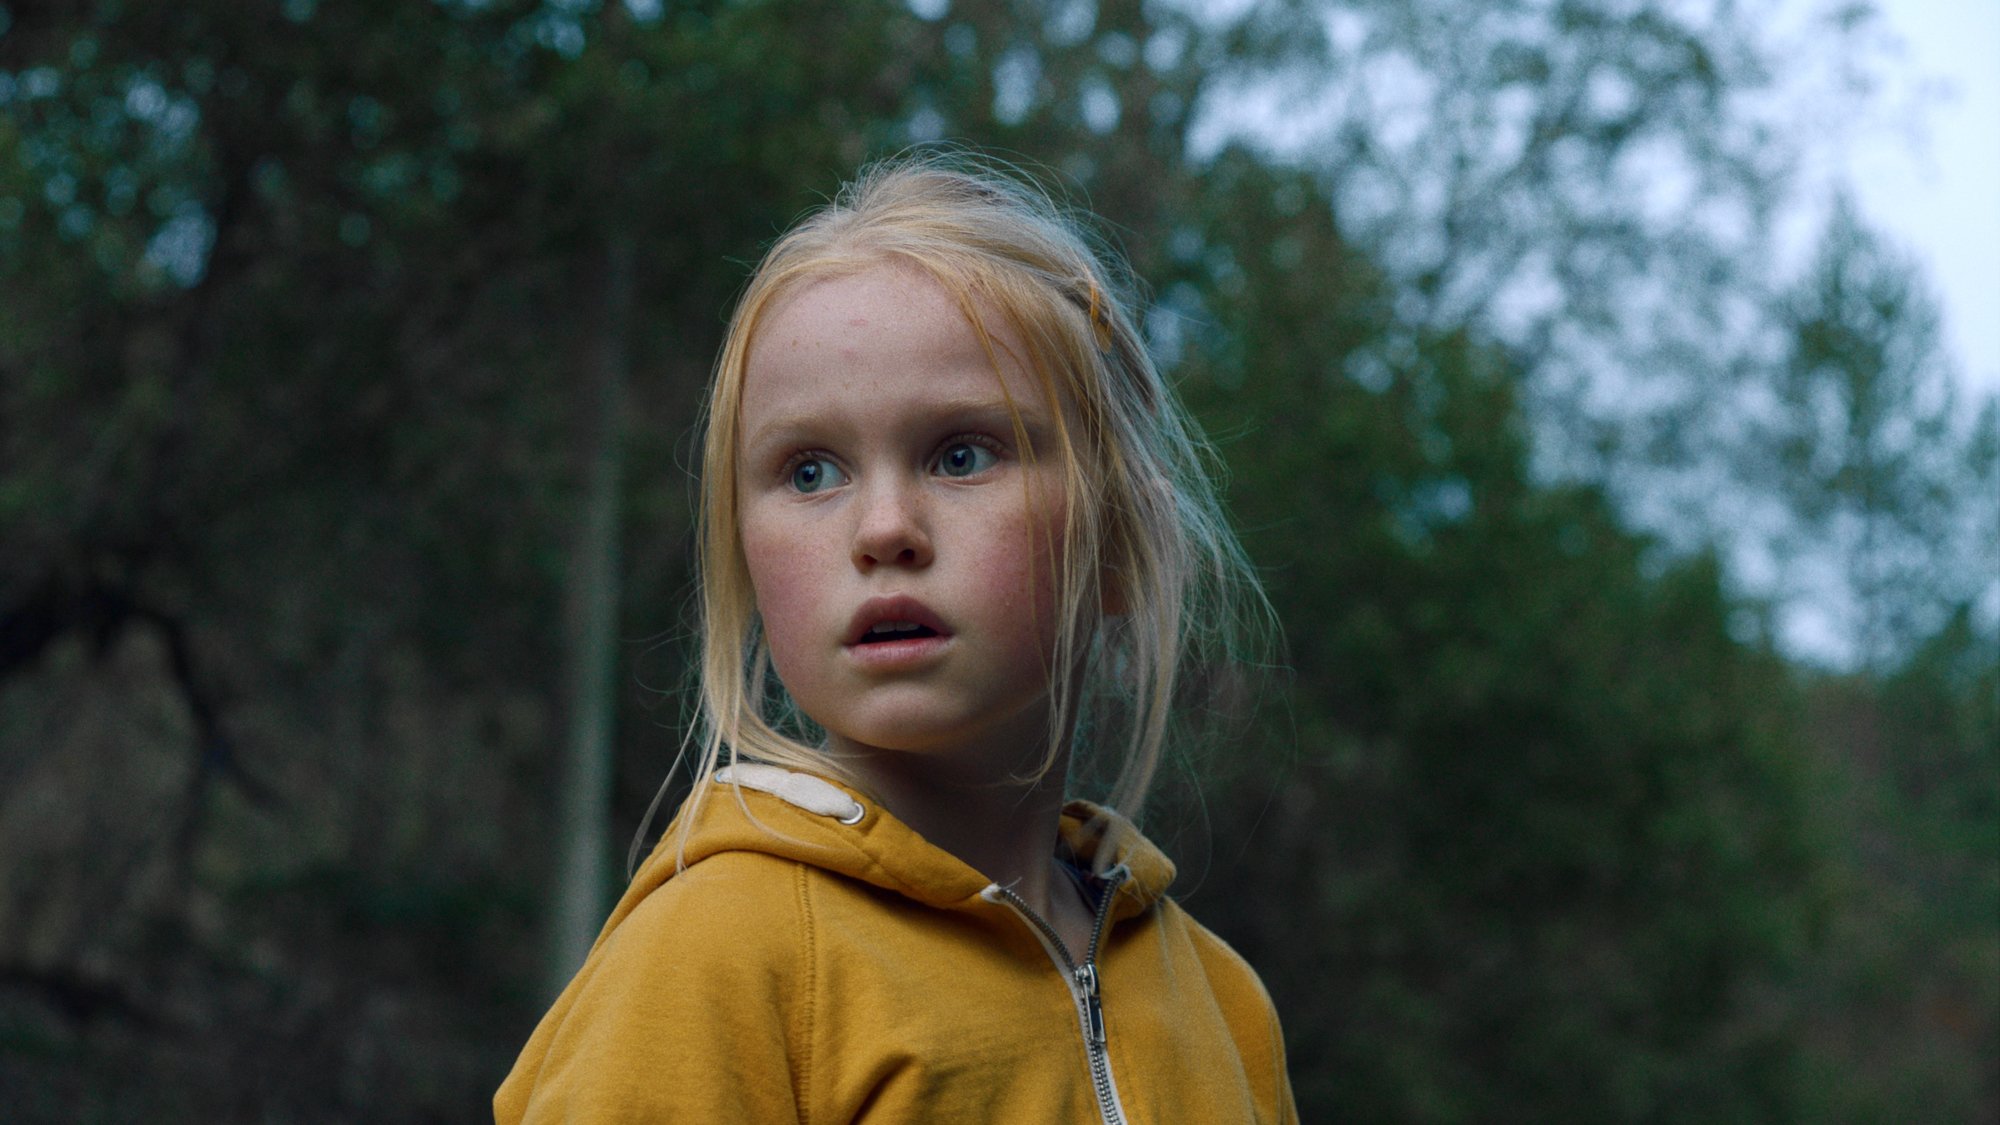 ‘The Innocents’ Movie Review: Eskil Vogt Depicts a Distressing Depiction of Childhood